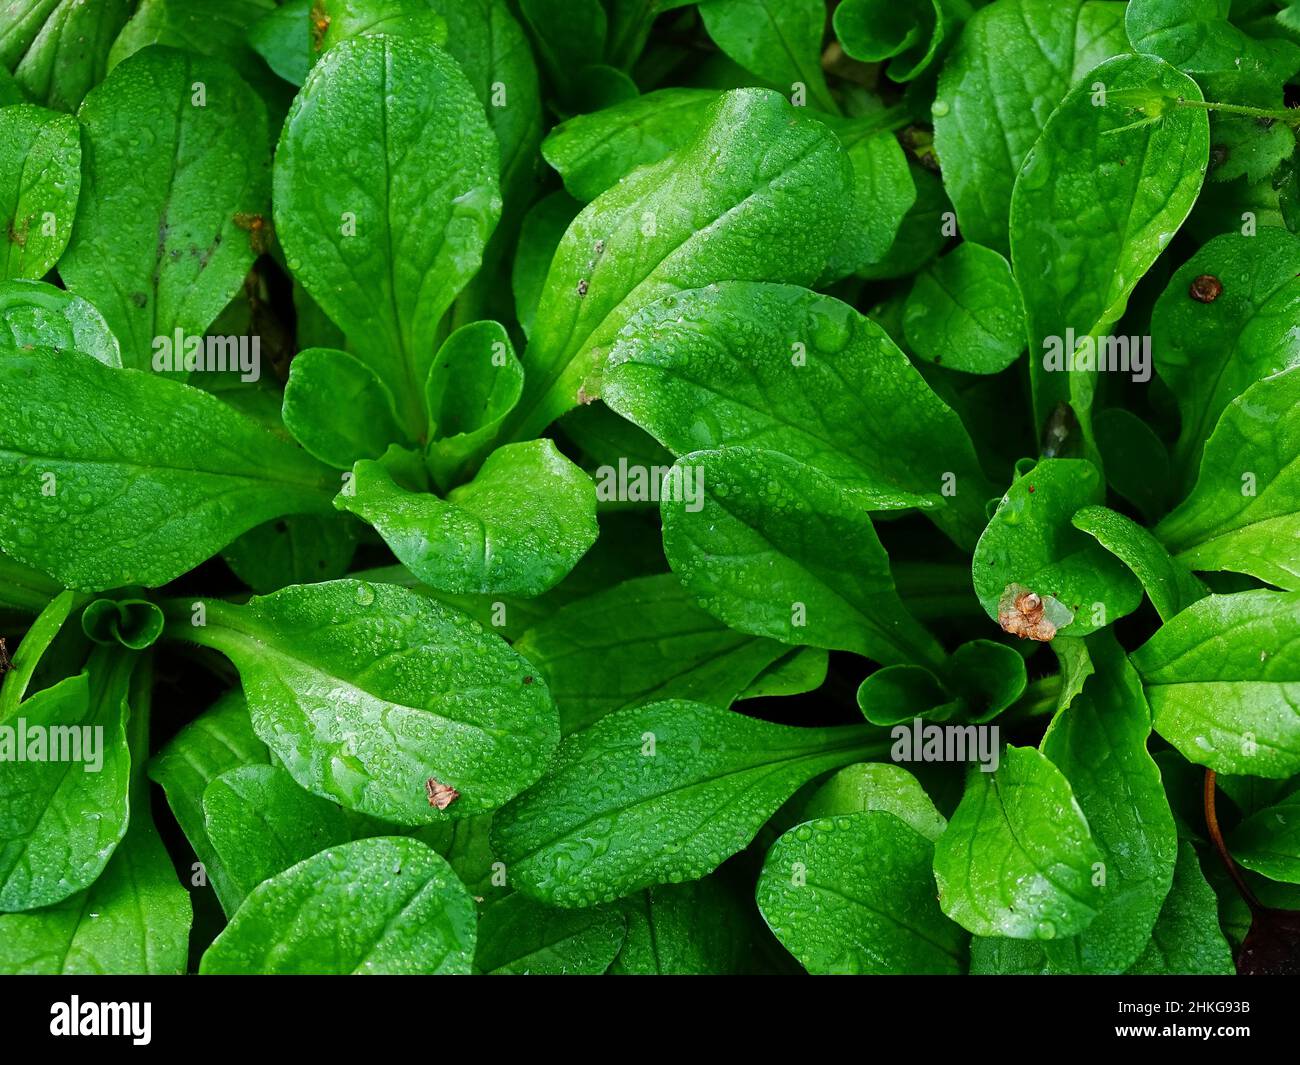 close up of a lot of lamb's lettuce (Valerianella locusta), with raindrops , in November in the vegetable garden, with colors green and dark green Stock Photo